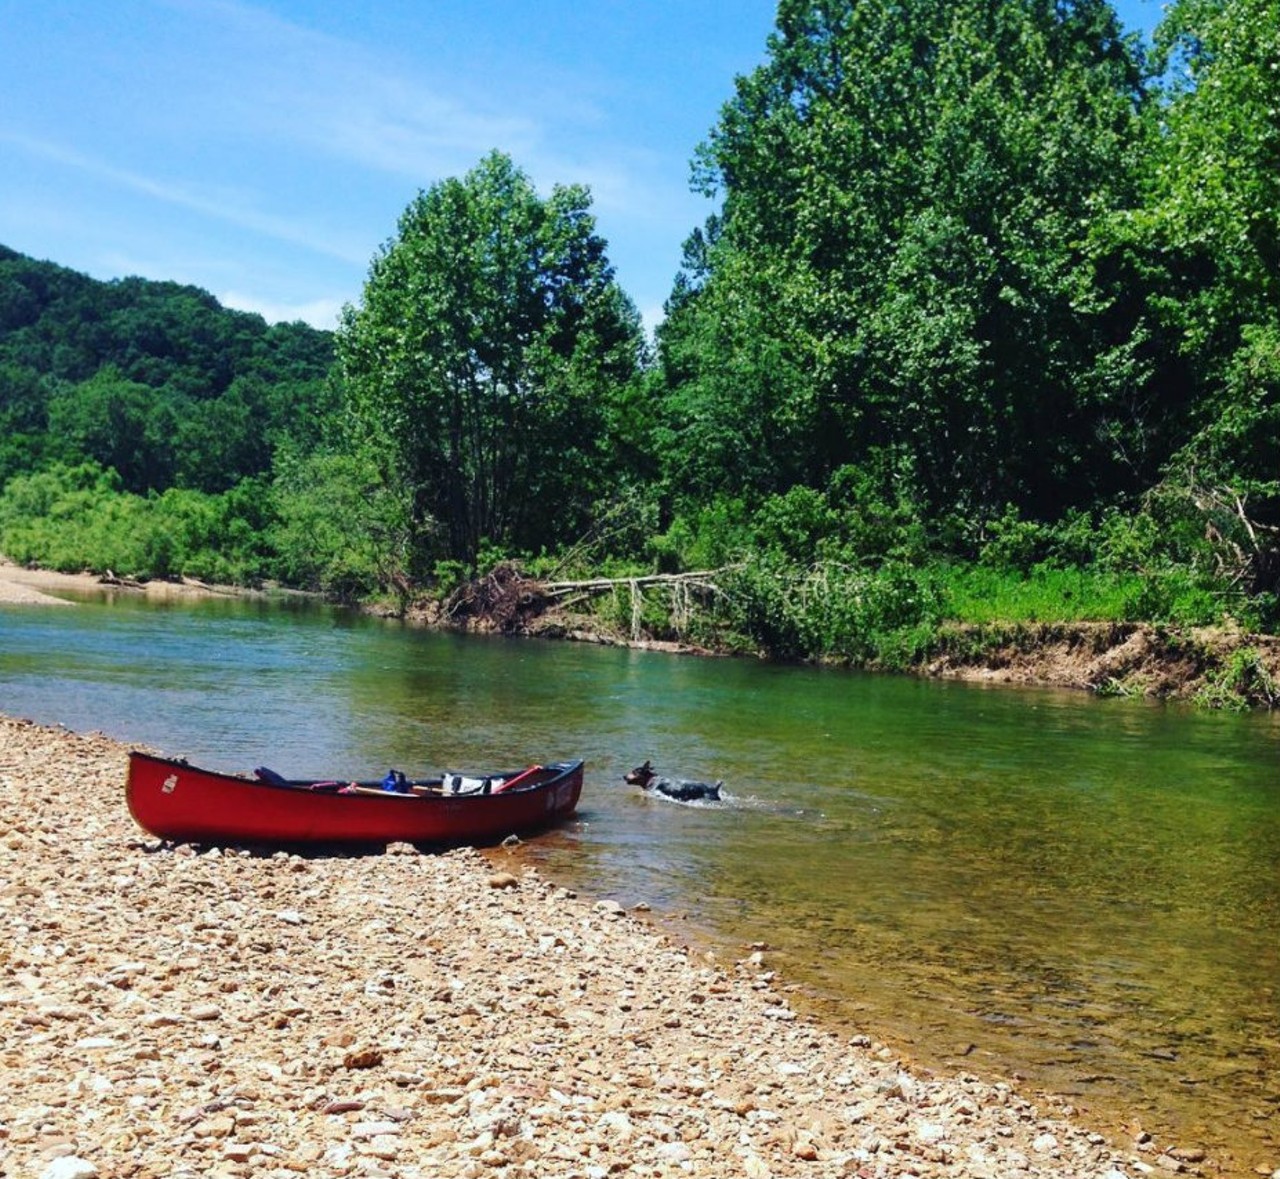 Jacks Fork
Eminence, MO
Jacks Fork juts off the Current River, and while it's less crowded, it's just as pretty. The river is formed where two streams (the North Prong and the South Prong) come together, making for a pretty view of the bluff-lined confluence. Photo courtesy of Instagram / hanks_hikes.